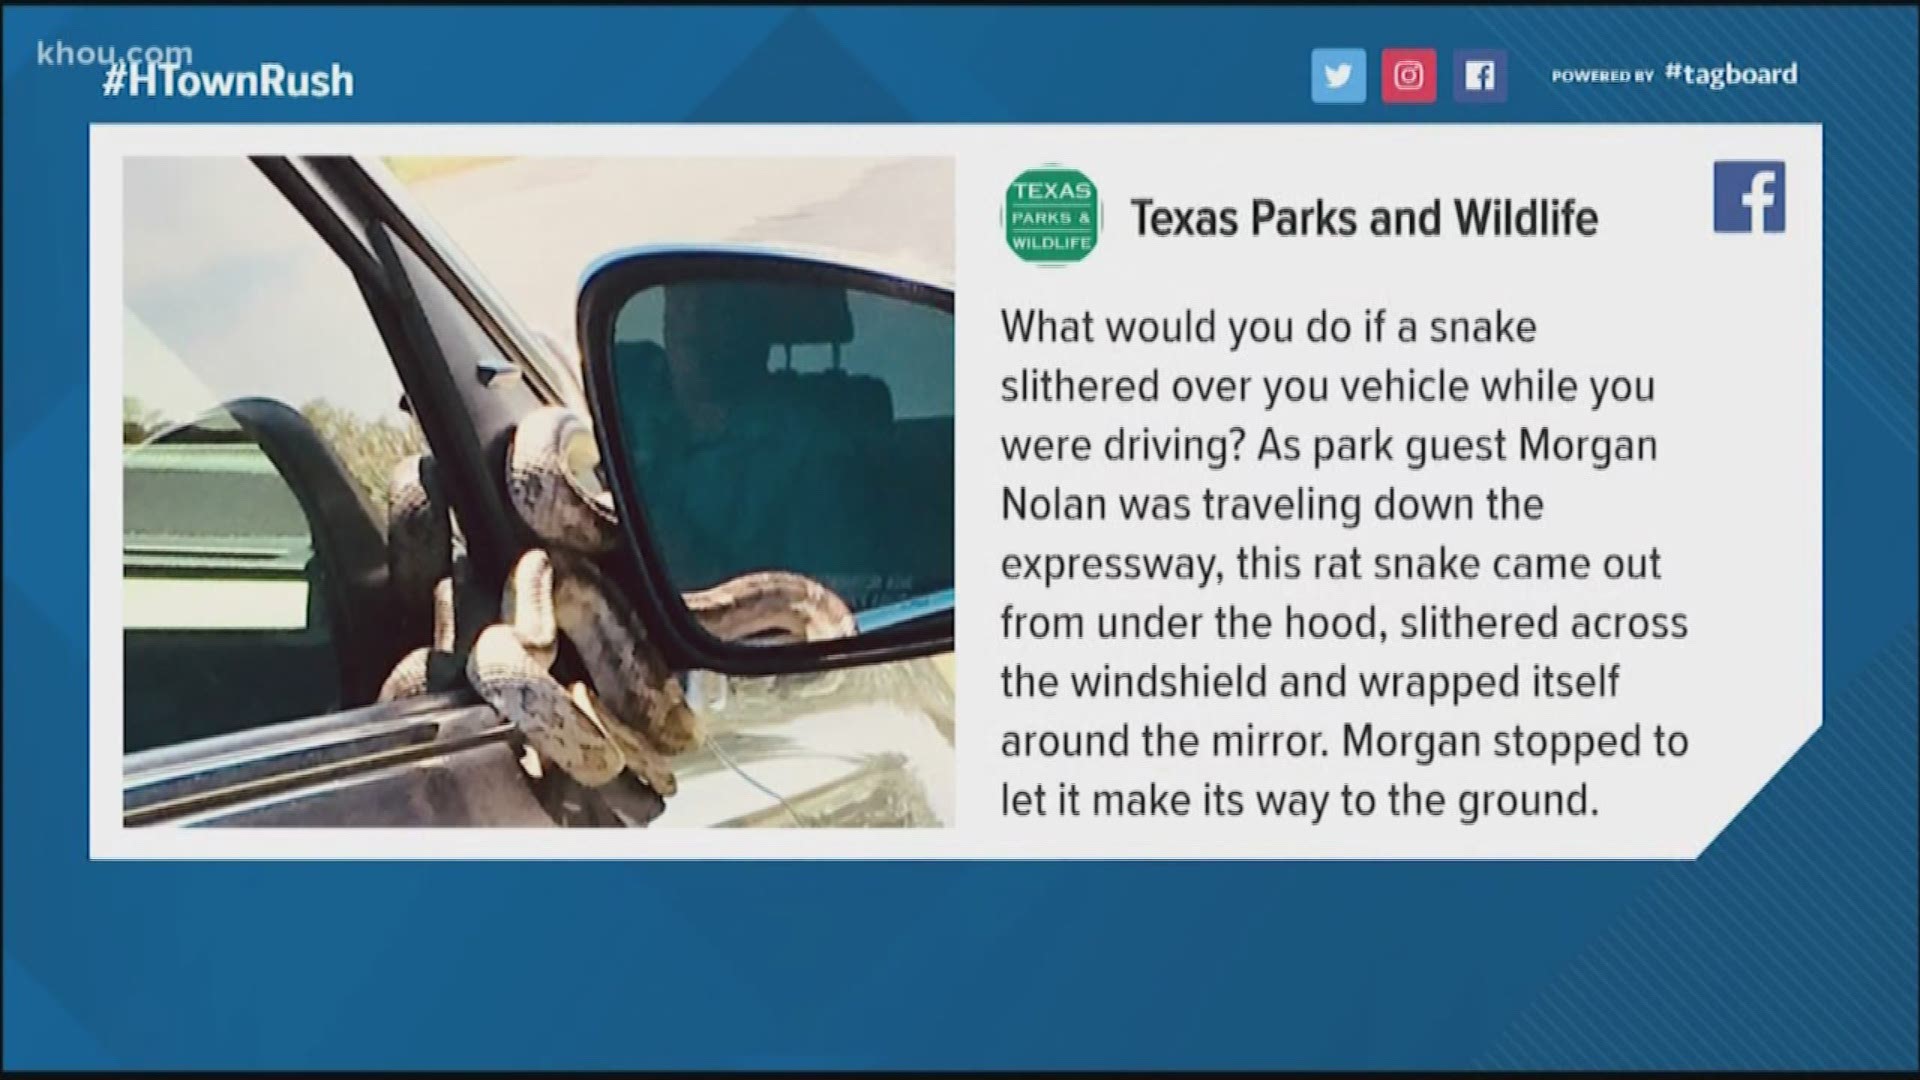 A snake slithered its way onto a car's windshield while a man was driving. Uh, no!